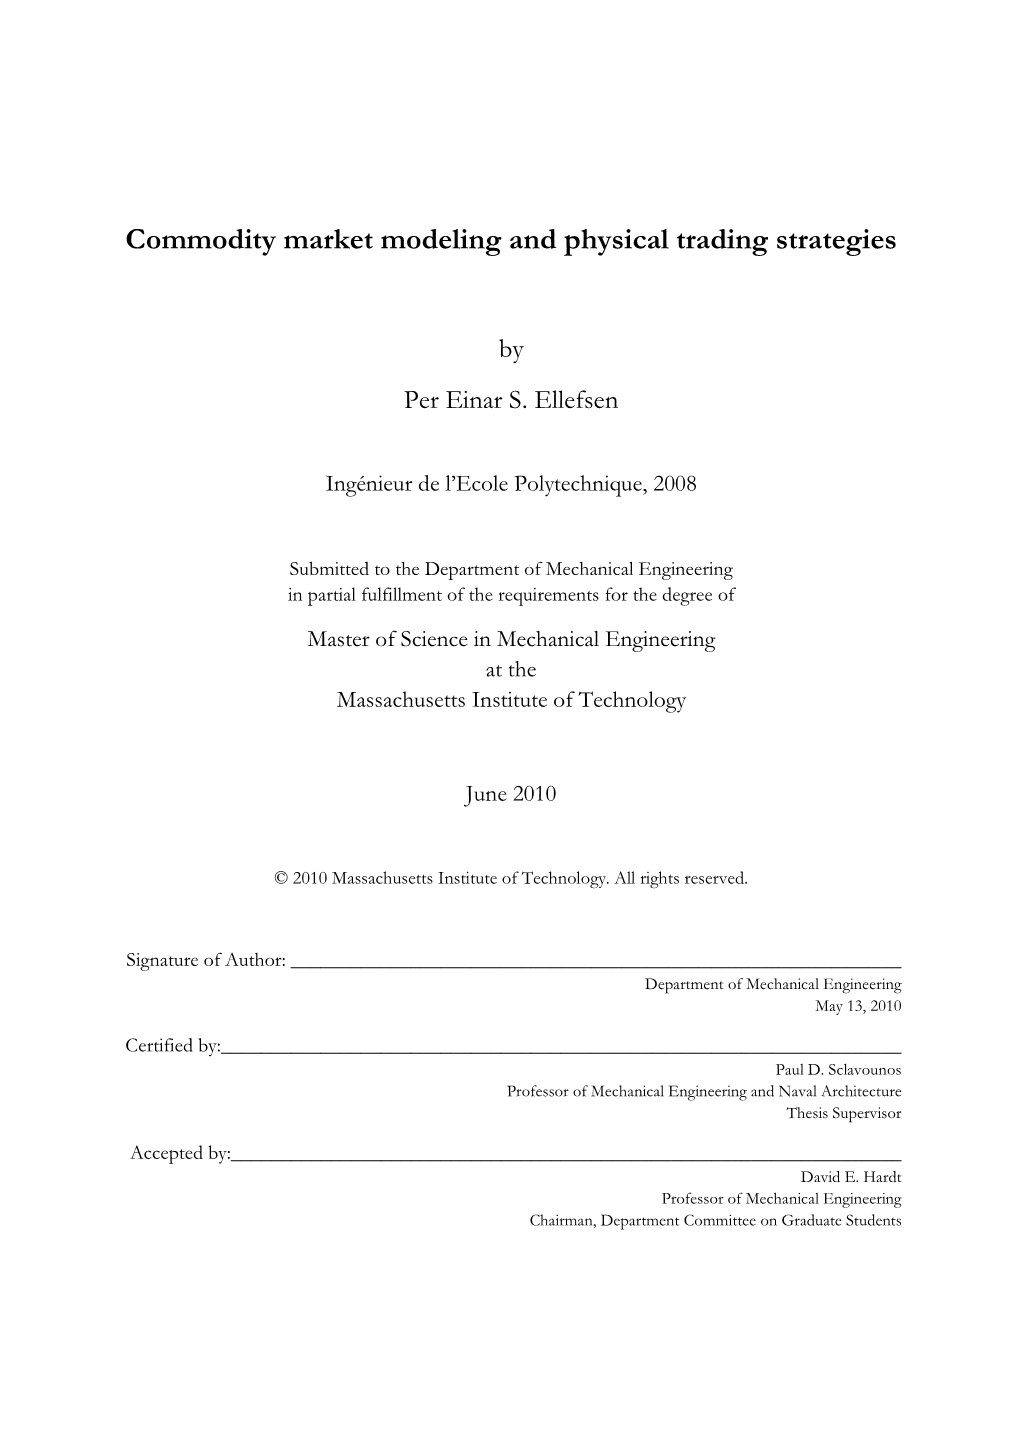 Commodity Market Modeling and Physical Trading Strategies